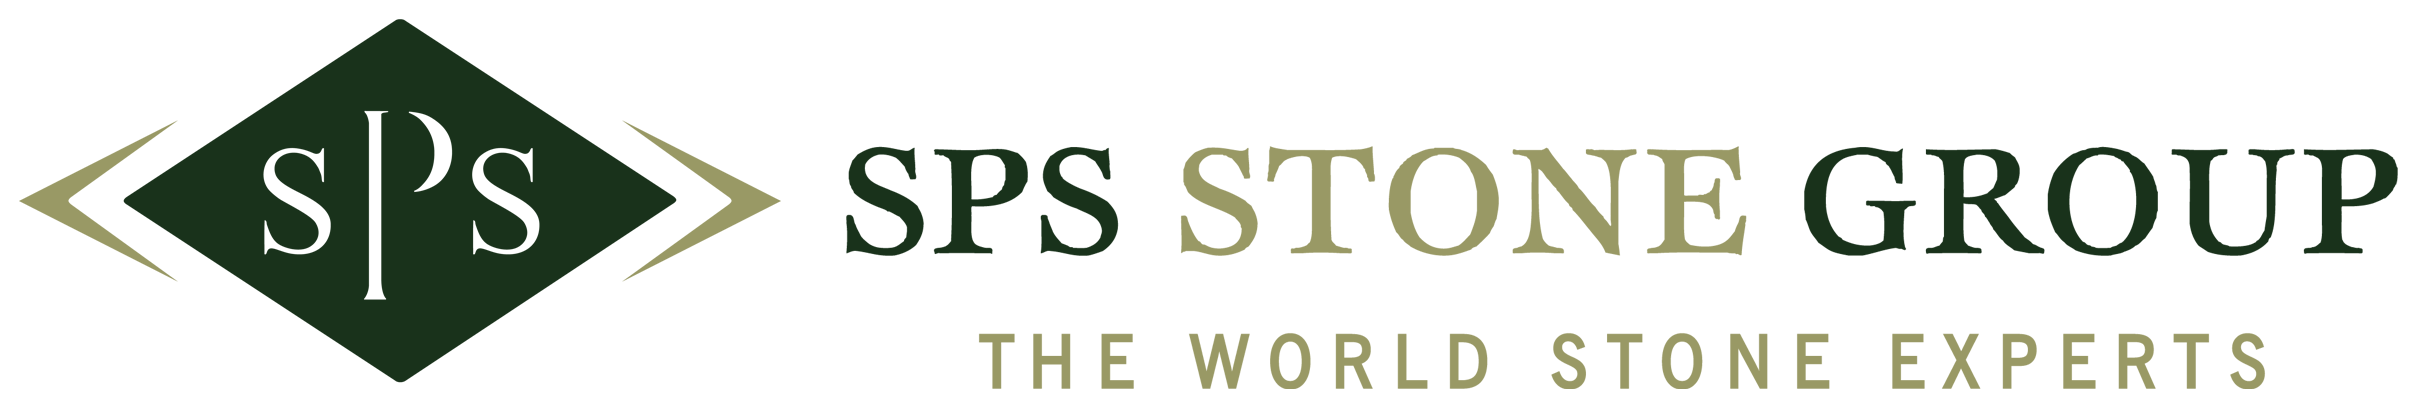 SPS STONE GROUP - The World Stone Experts